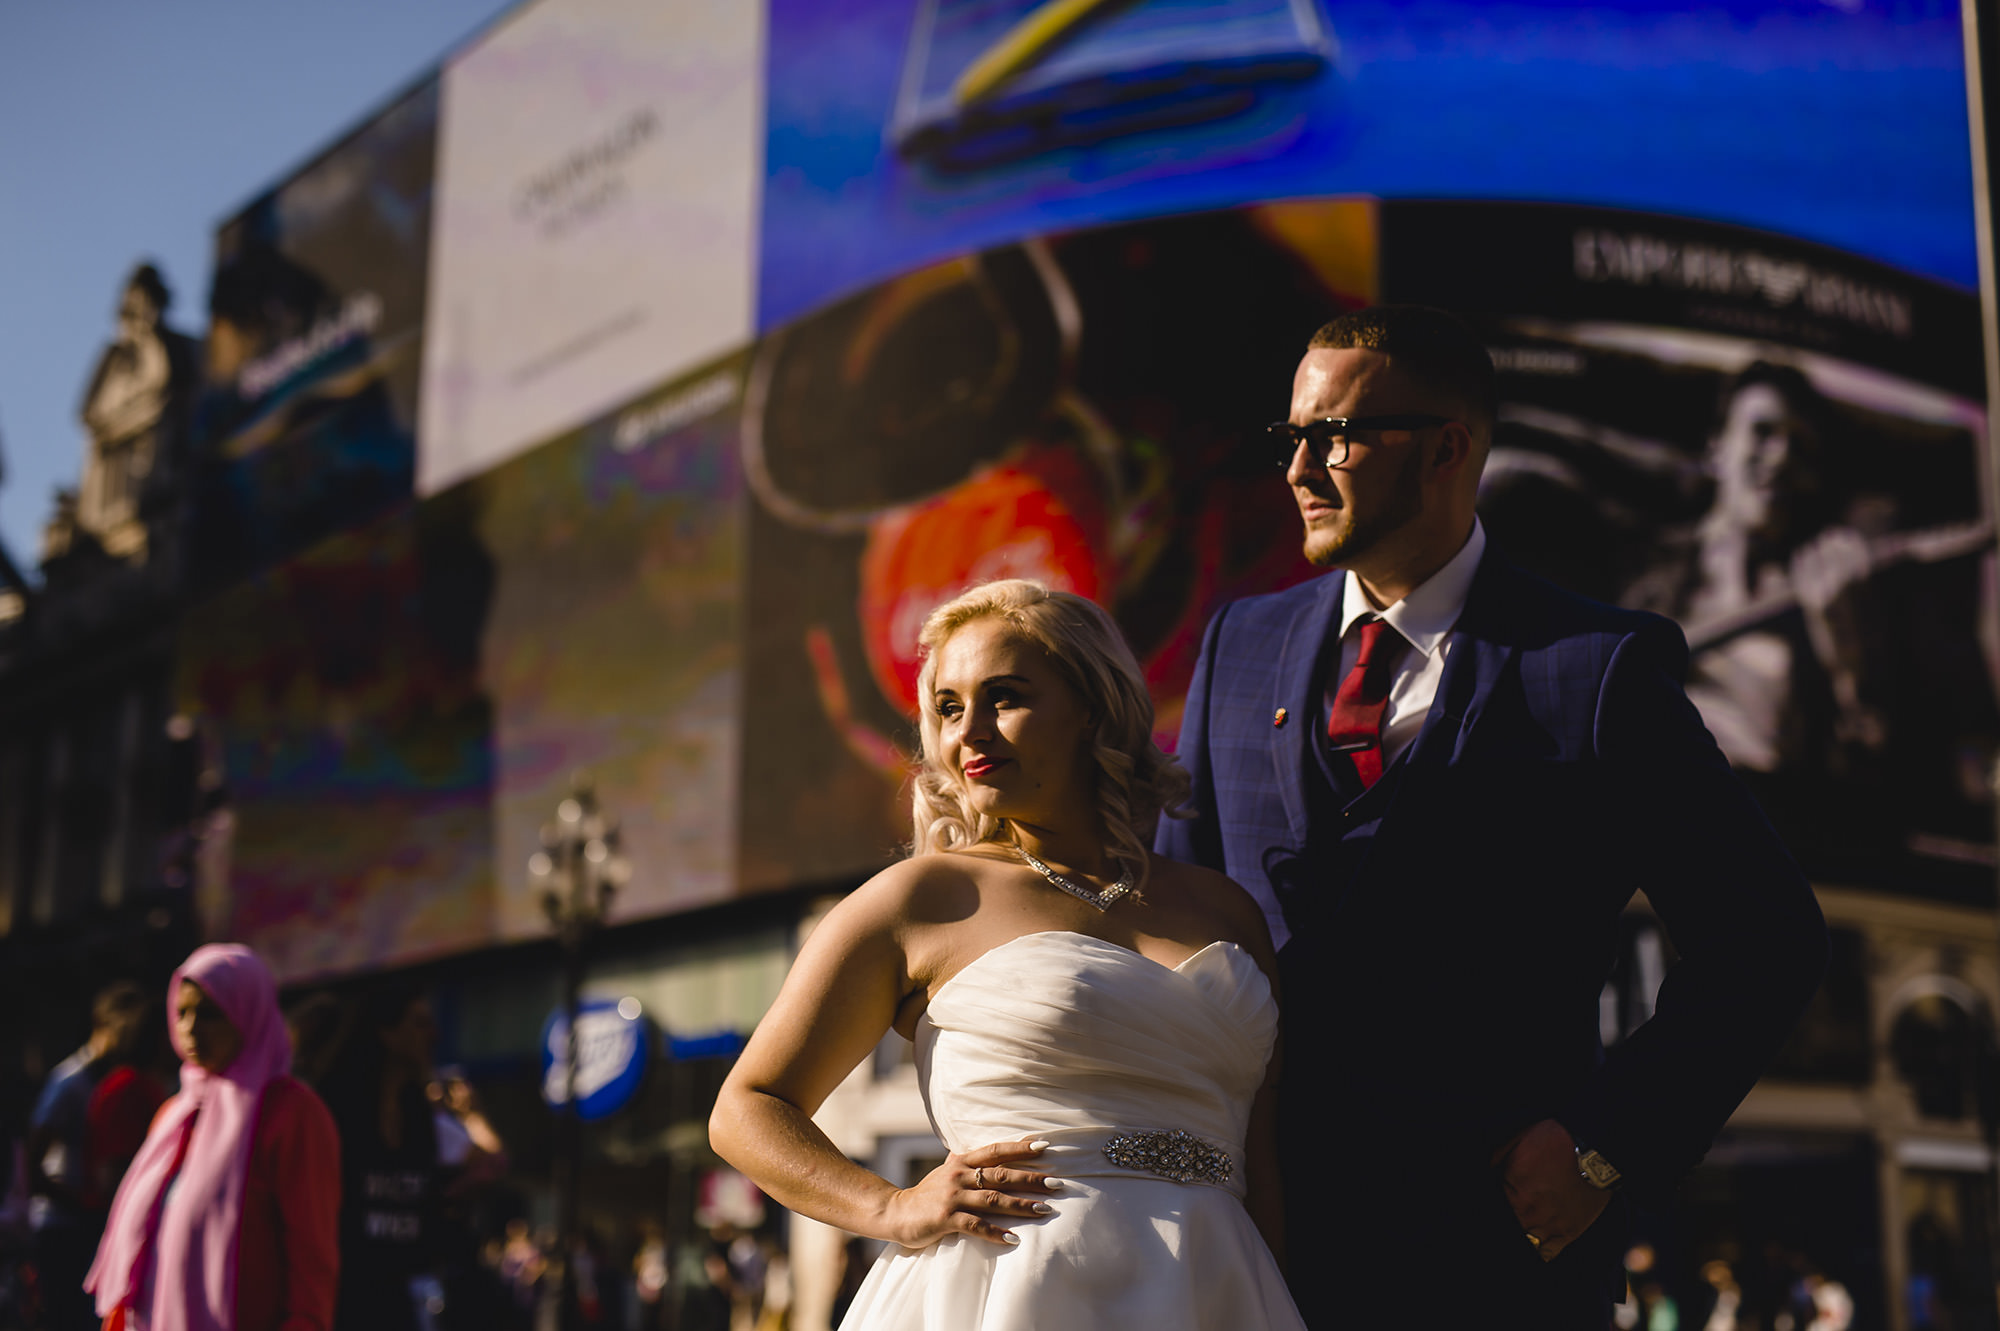 bride and groom portraits in central london